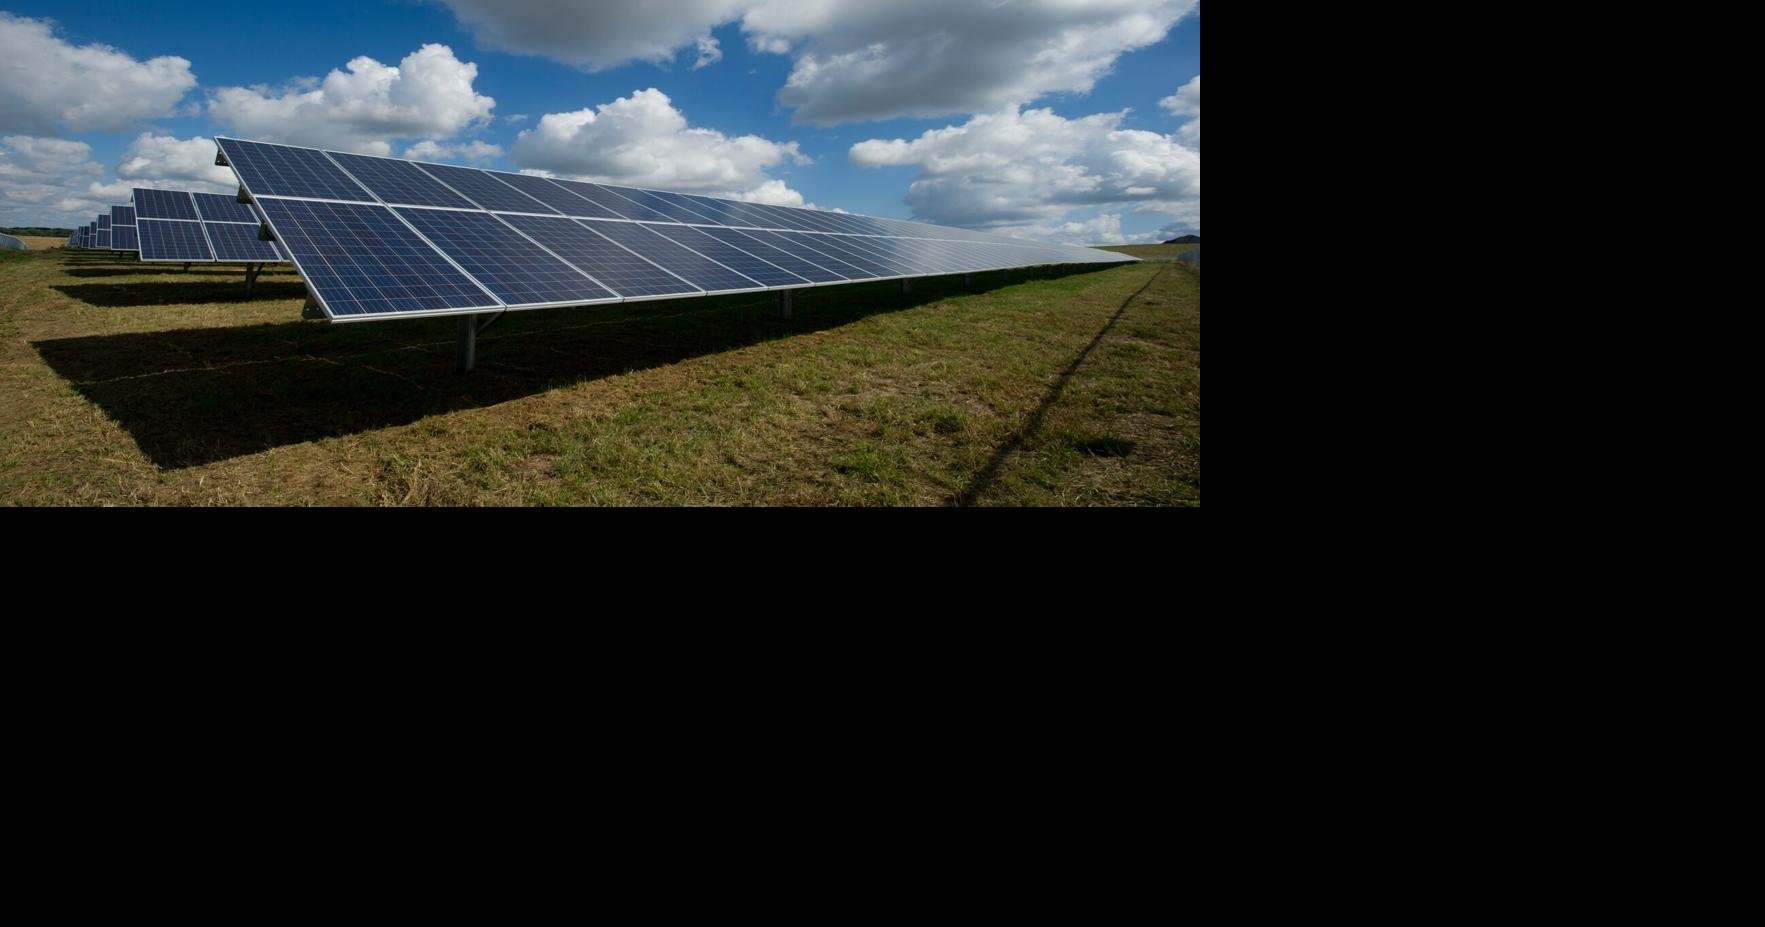 County Supervisors Will Hear Grant Line Solar Appeal Claim